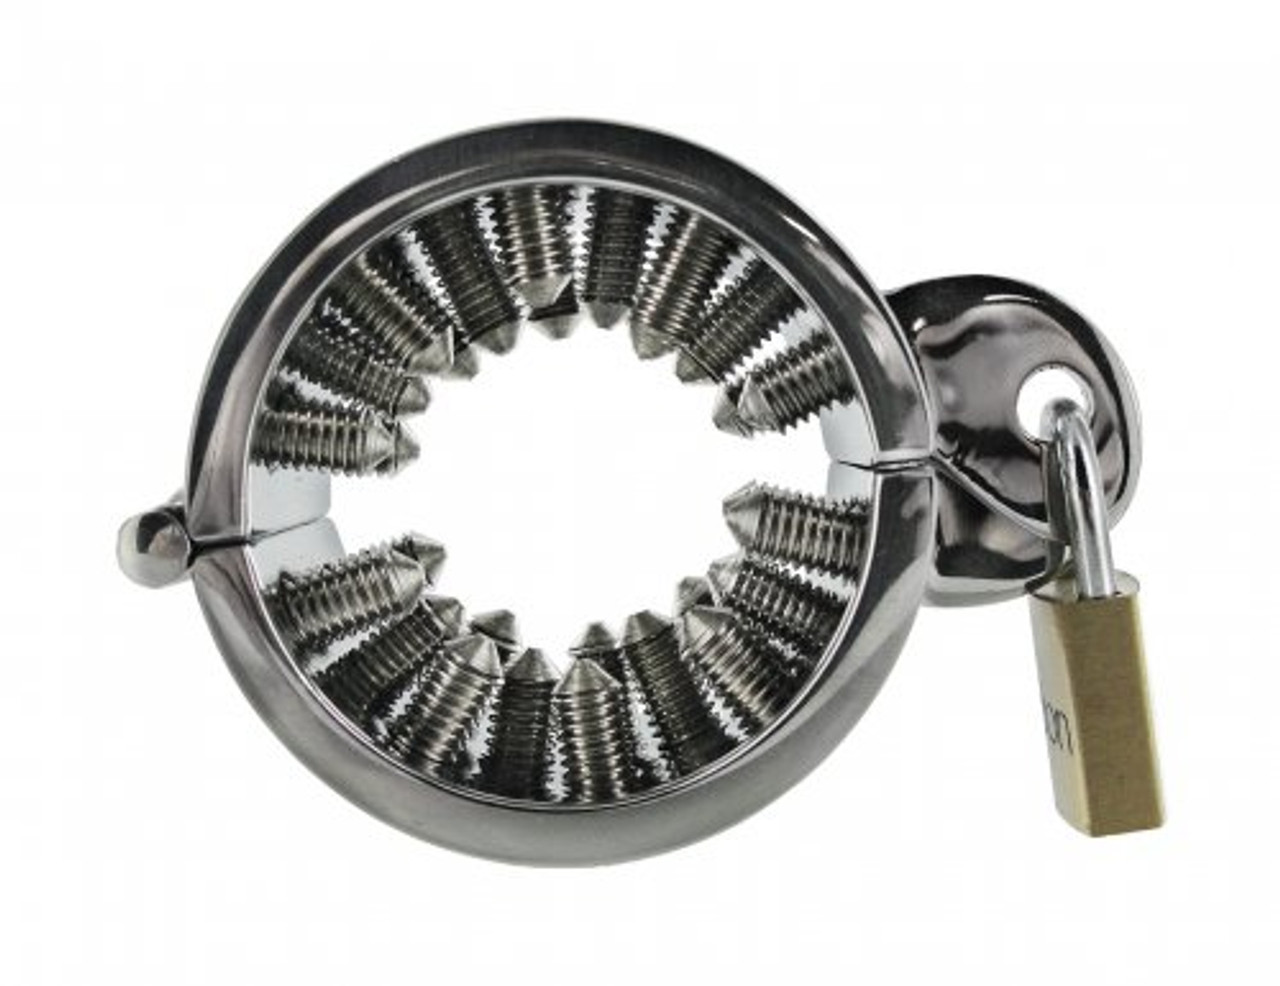 Scrotum Stretcher, Penis Weight, Locking Ball Weight, Testicle Stretcher  with Allen Key (Stainless Steel)